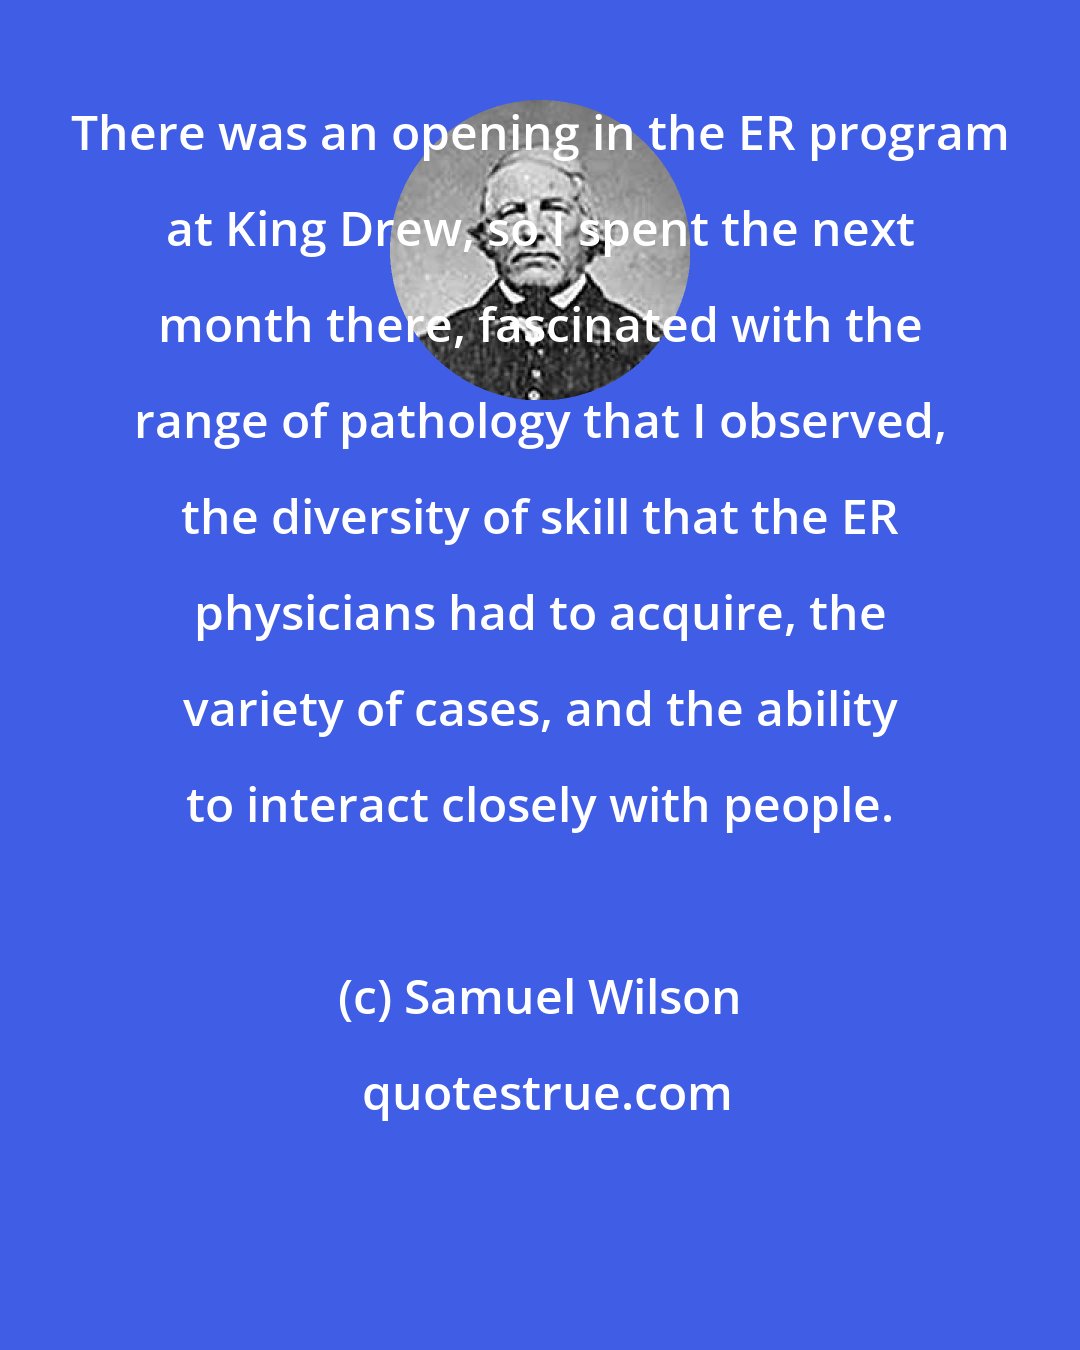 Samuel Wilson: There was an opening in the ER program at King Drew, so I spent the next month there, fascinated with the range of pathology that I observed, the diversity of skill that the ER physicians had to acquire, the variety of cases, and the ability to interact closely with people.